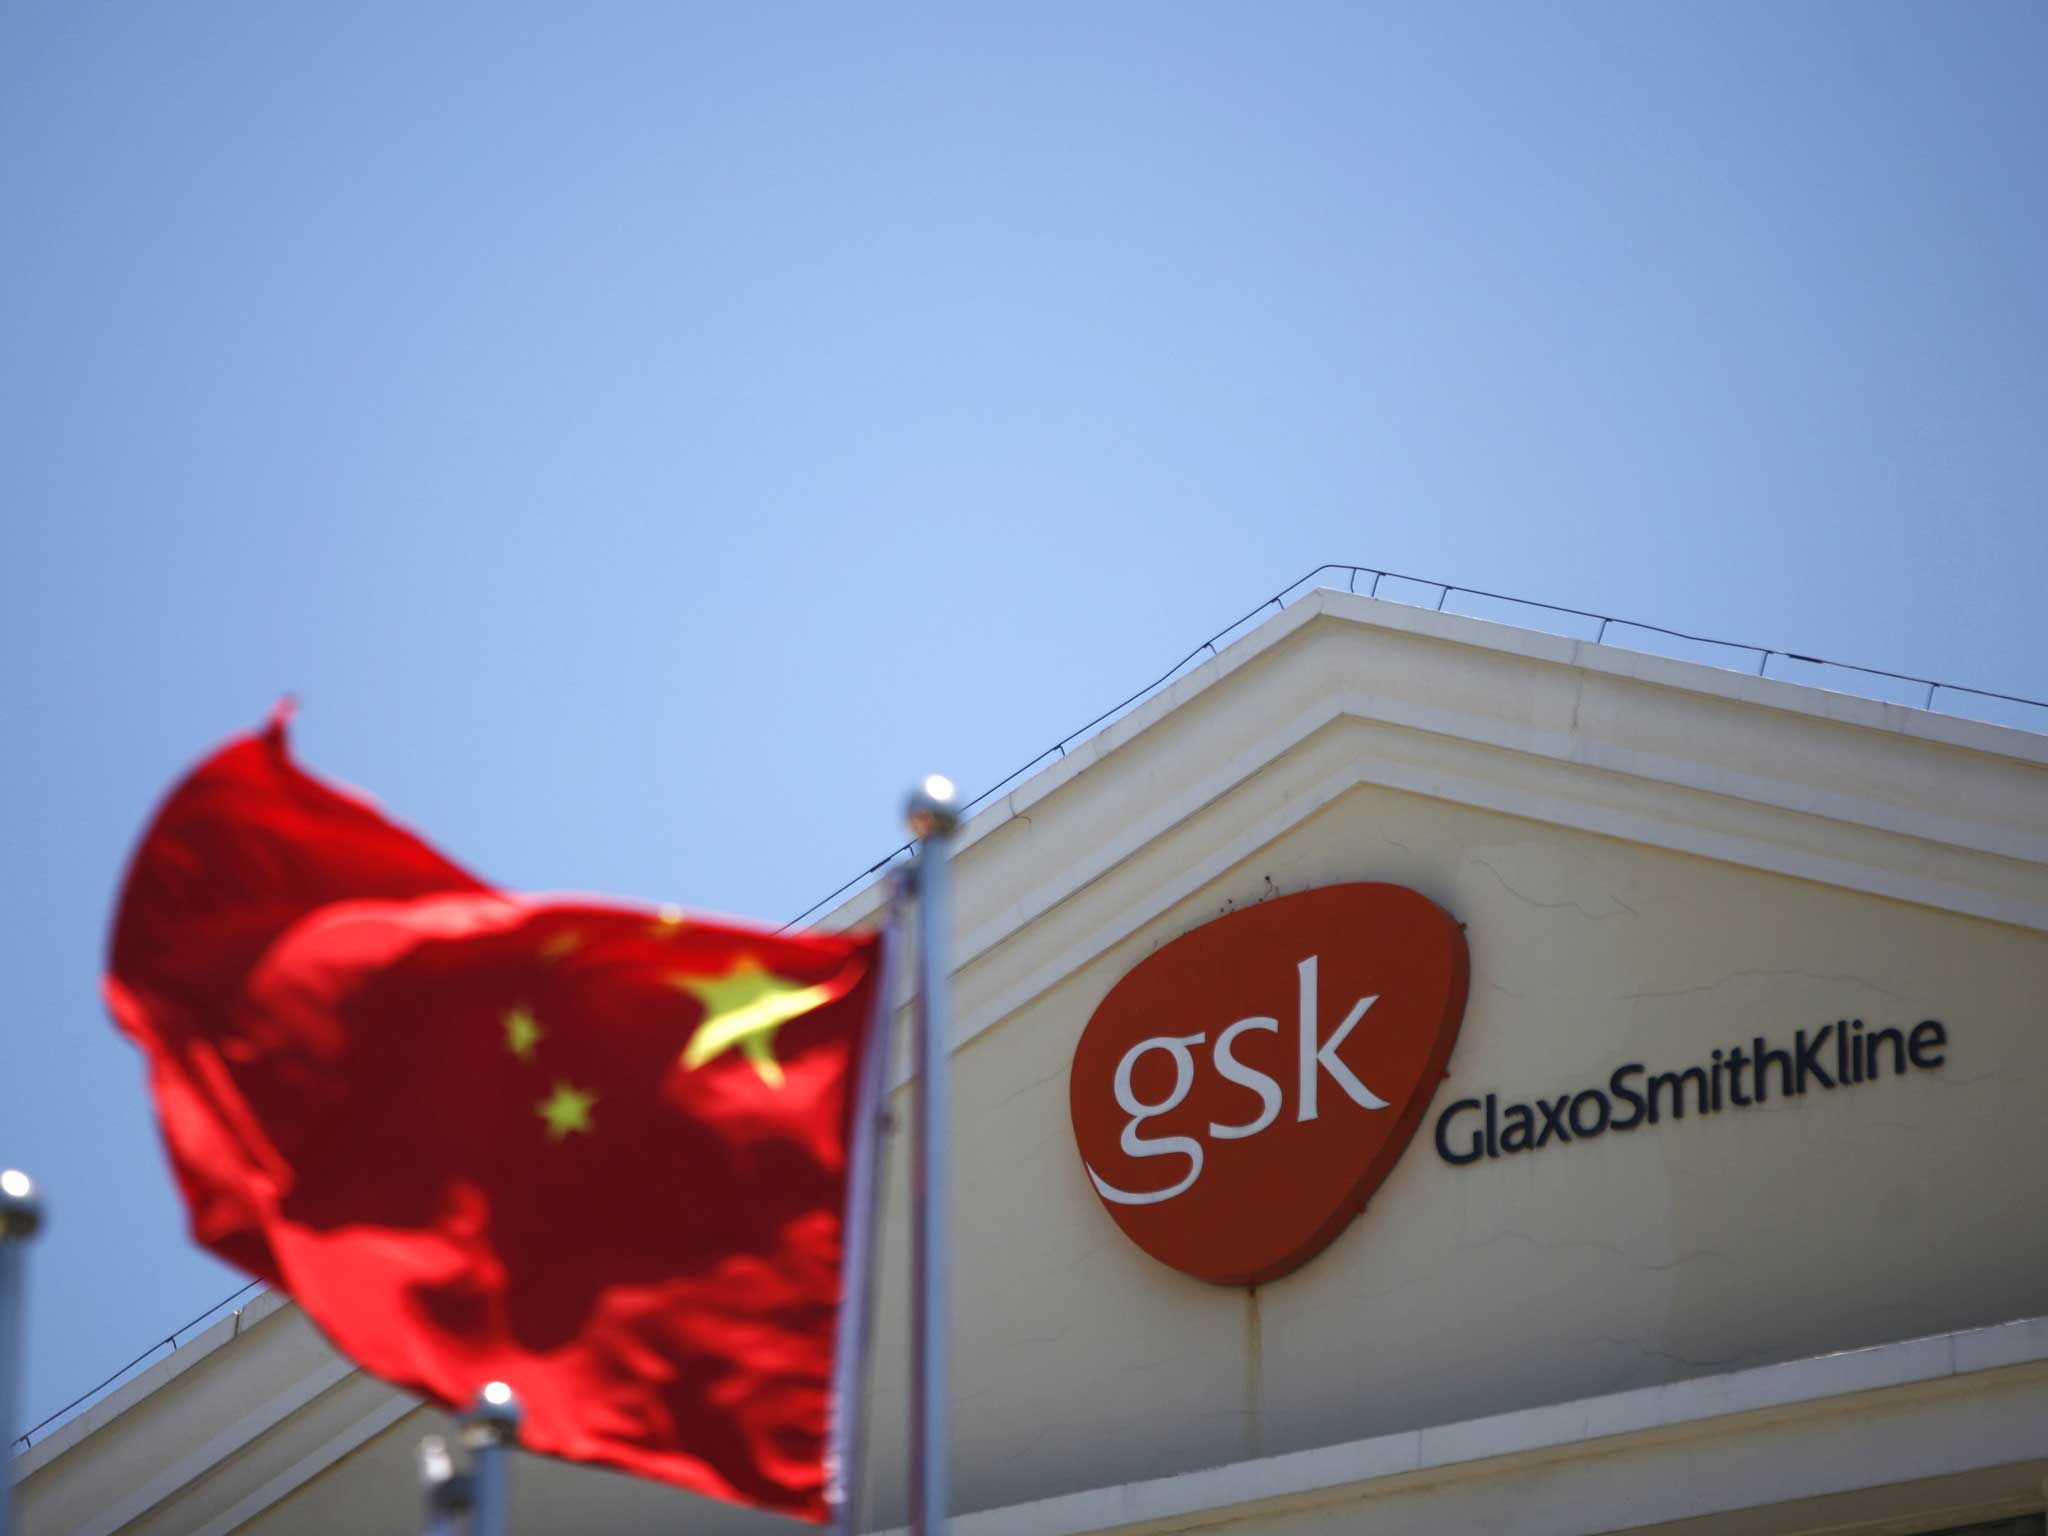 Chinese police today accused GlaxoSmithKline of being the “ringleader” in a massive bribery scandal